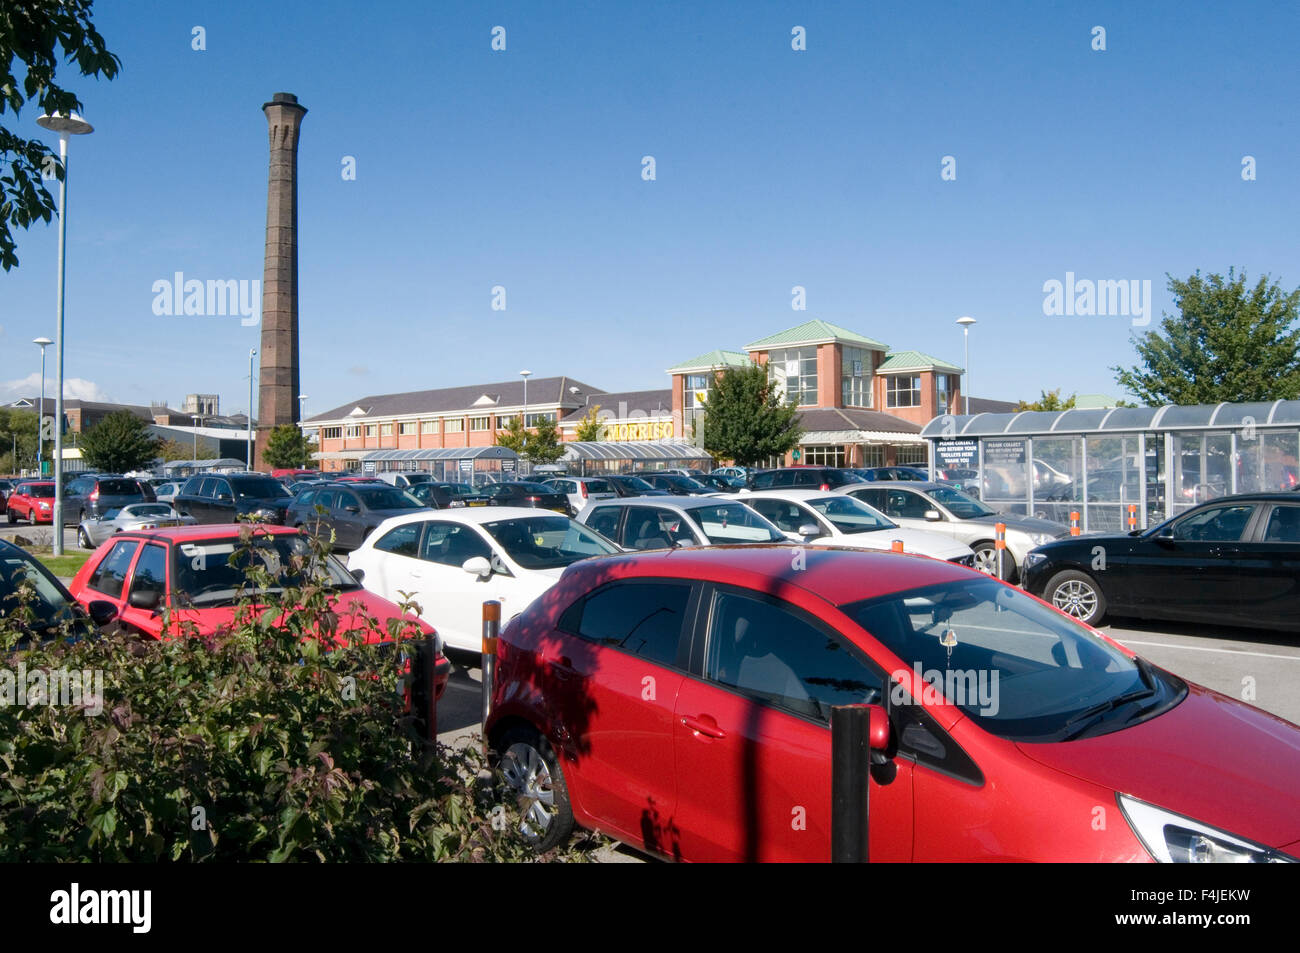 out of town superstore car park parking parks supermarket large super huge store shopping center centers hypermarket free car ca Stock Photo